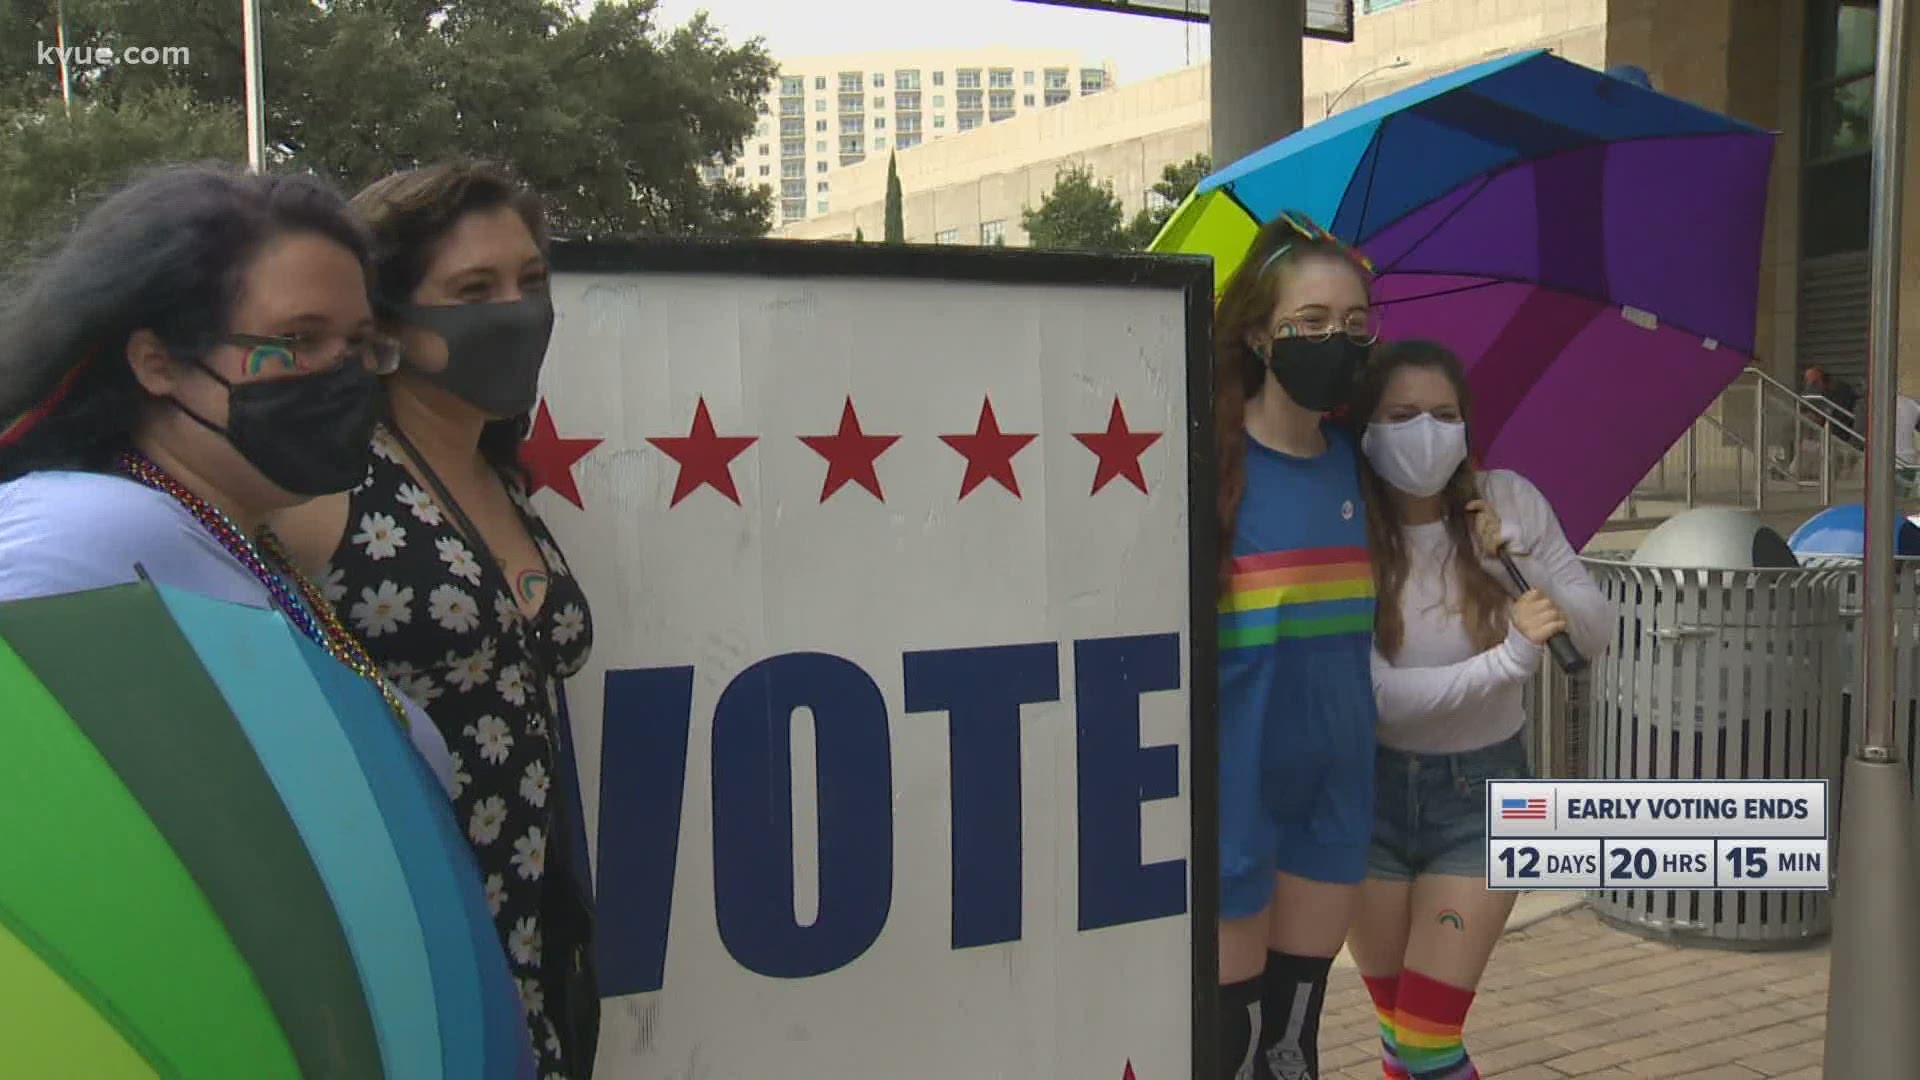 The 'Pride at the Polls' event mobilized LGBTQ voters in Austin on Saturday. KVUE spoke with some of the organizers.